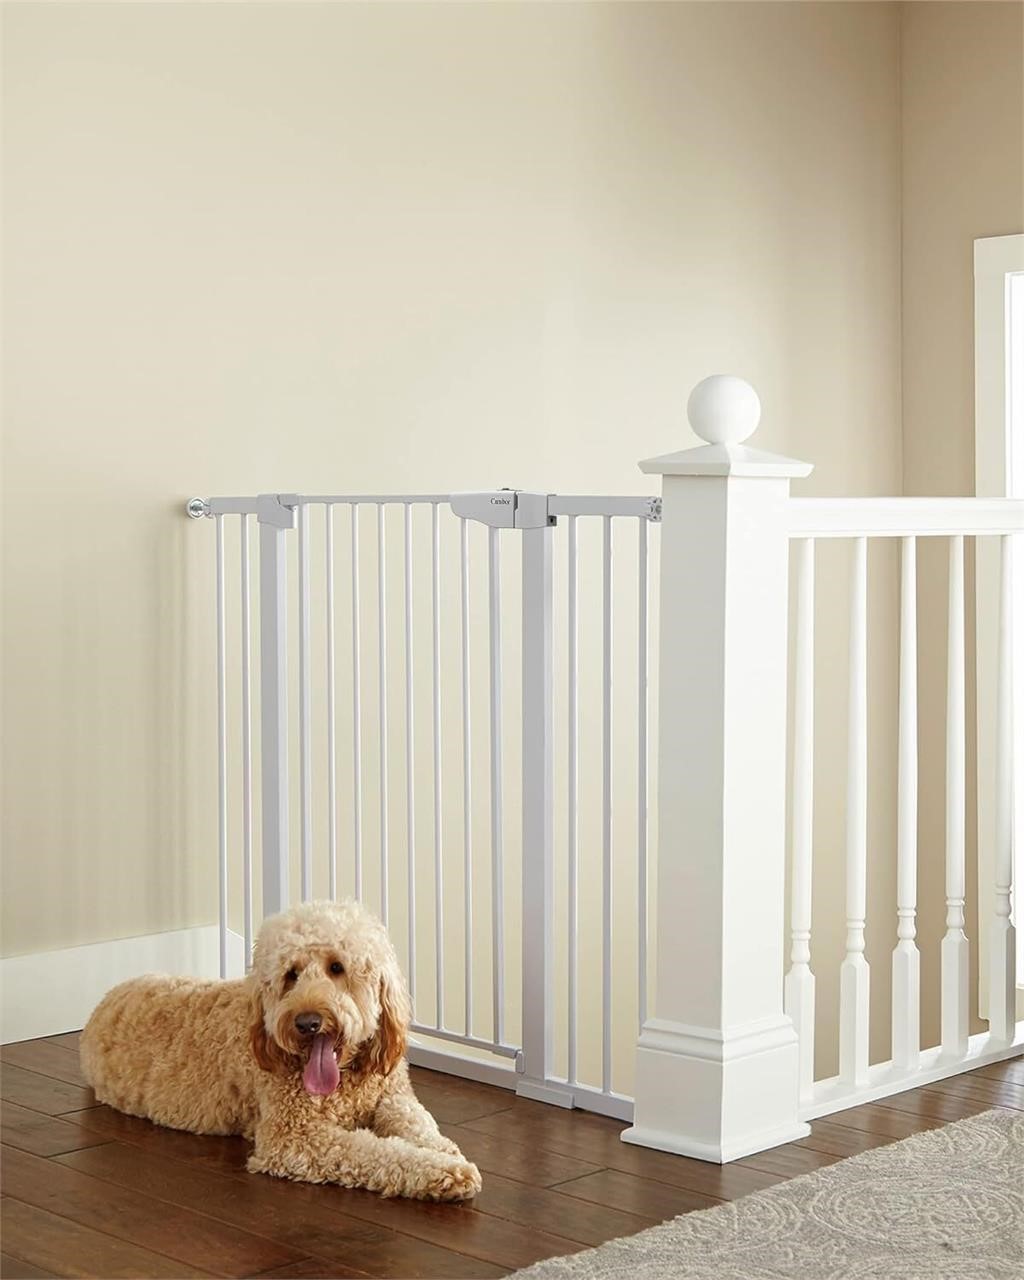 Cumbor 36 Extra Tall Baby Gate for Dogs and Kids w